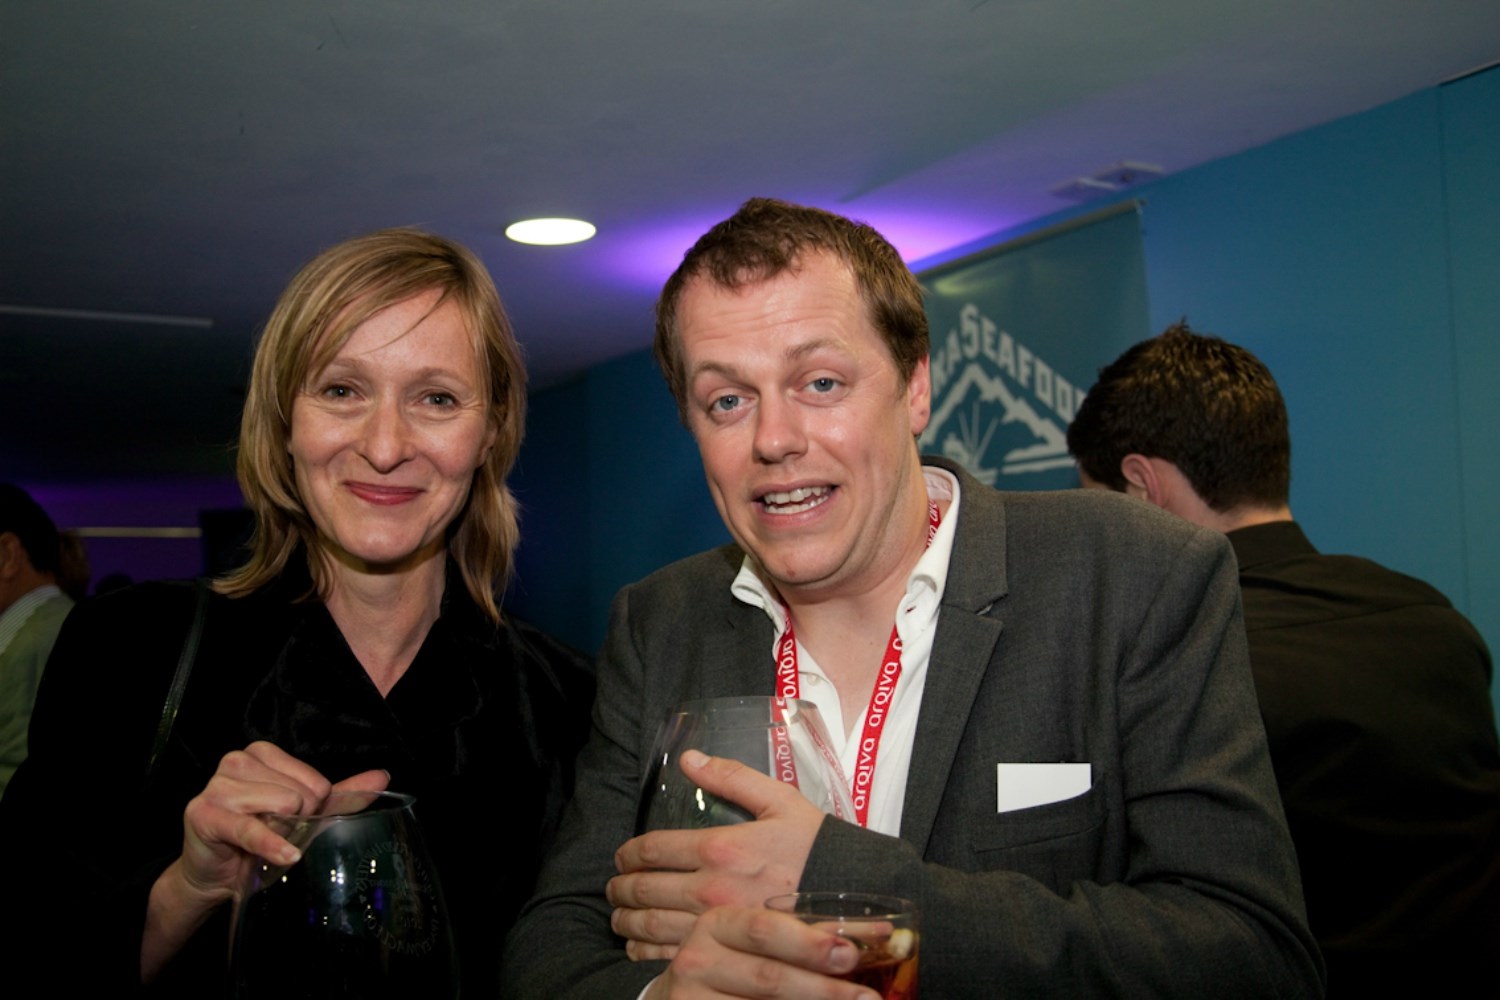 Awards winners Tracey MacLeod (left) and Tom Parker Bowles